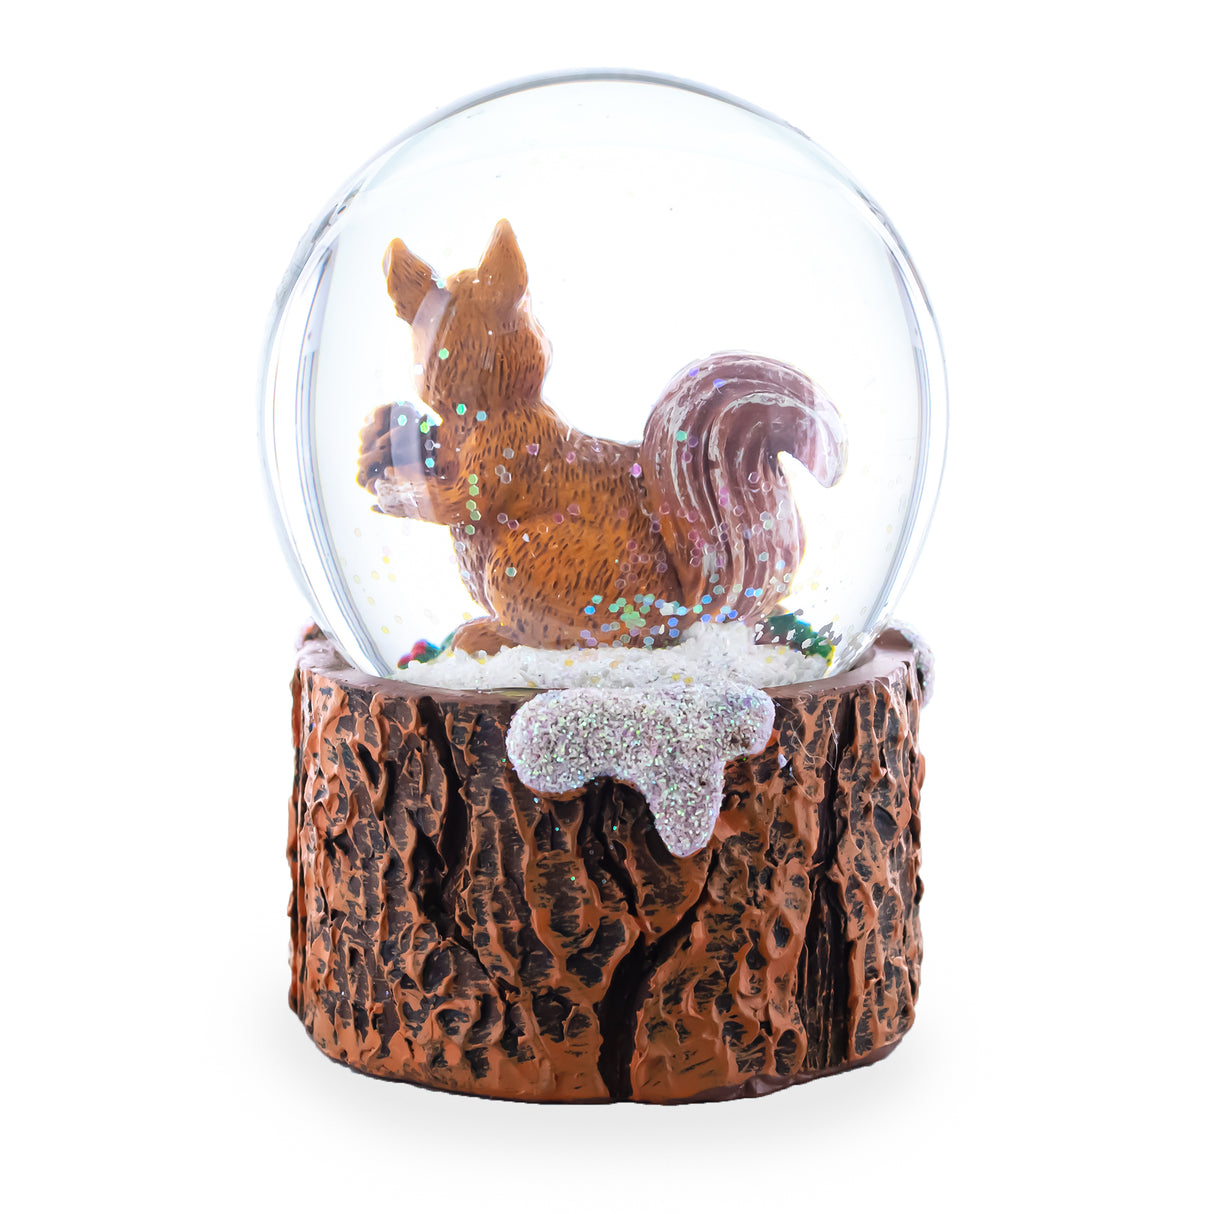 Pinecone Pal Mini Water Snow Globe: Squirrel with a Nutty Friend ,dimensions in inches: 3.5 x 2.4 x 2.4